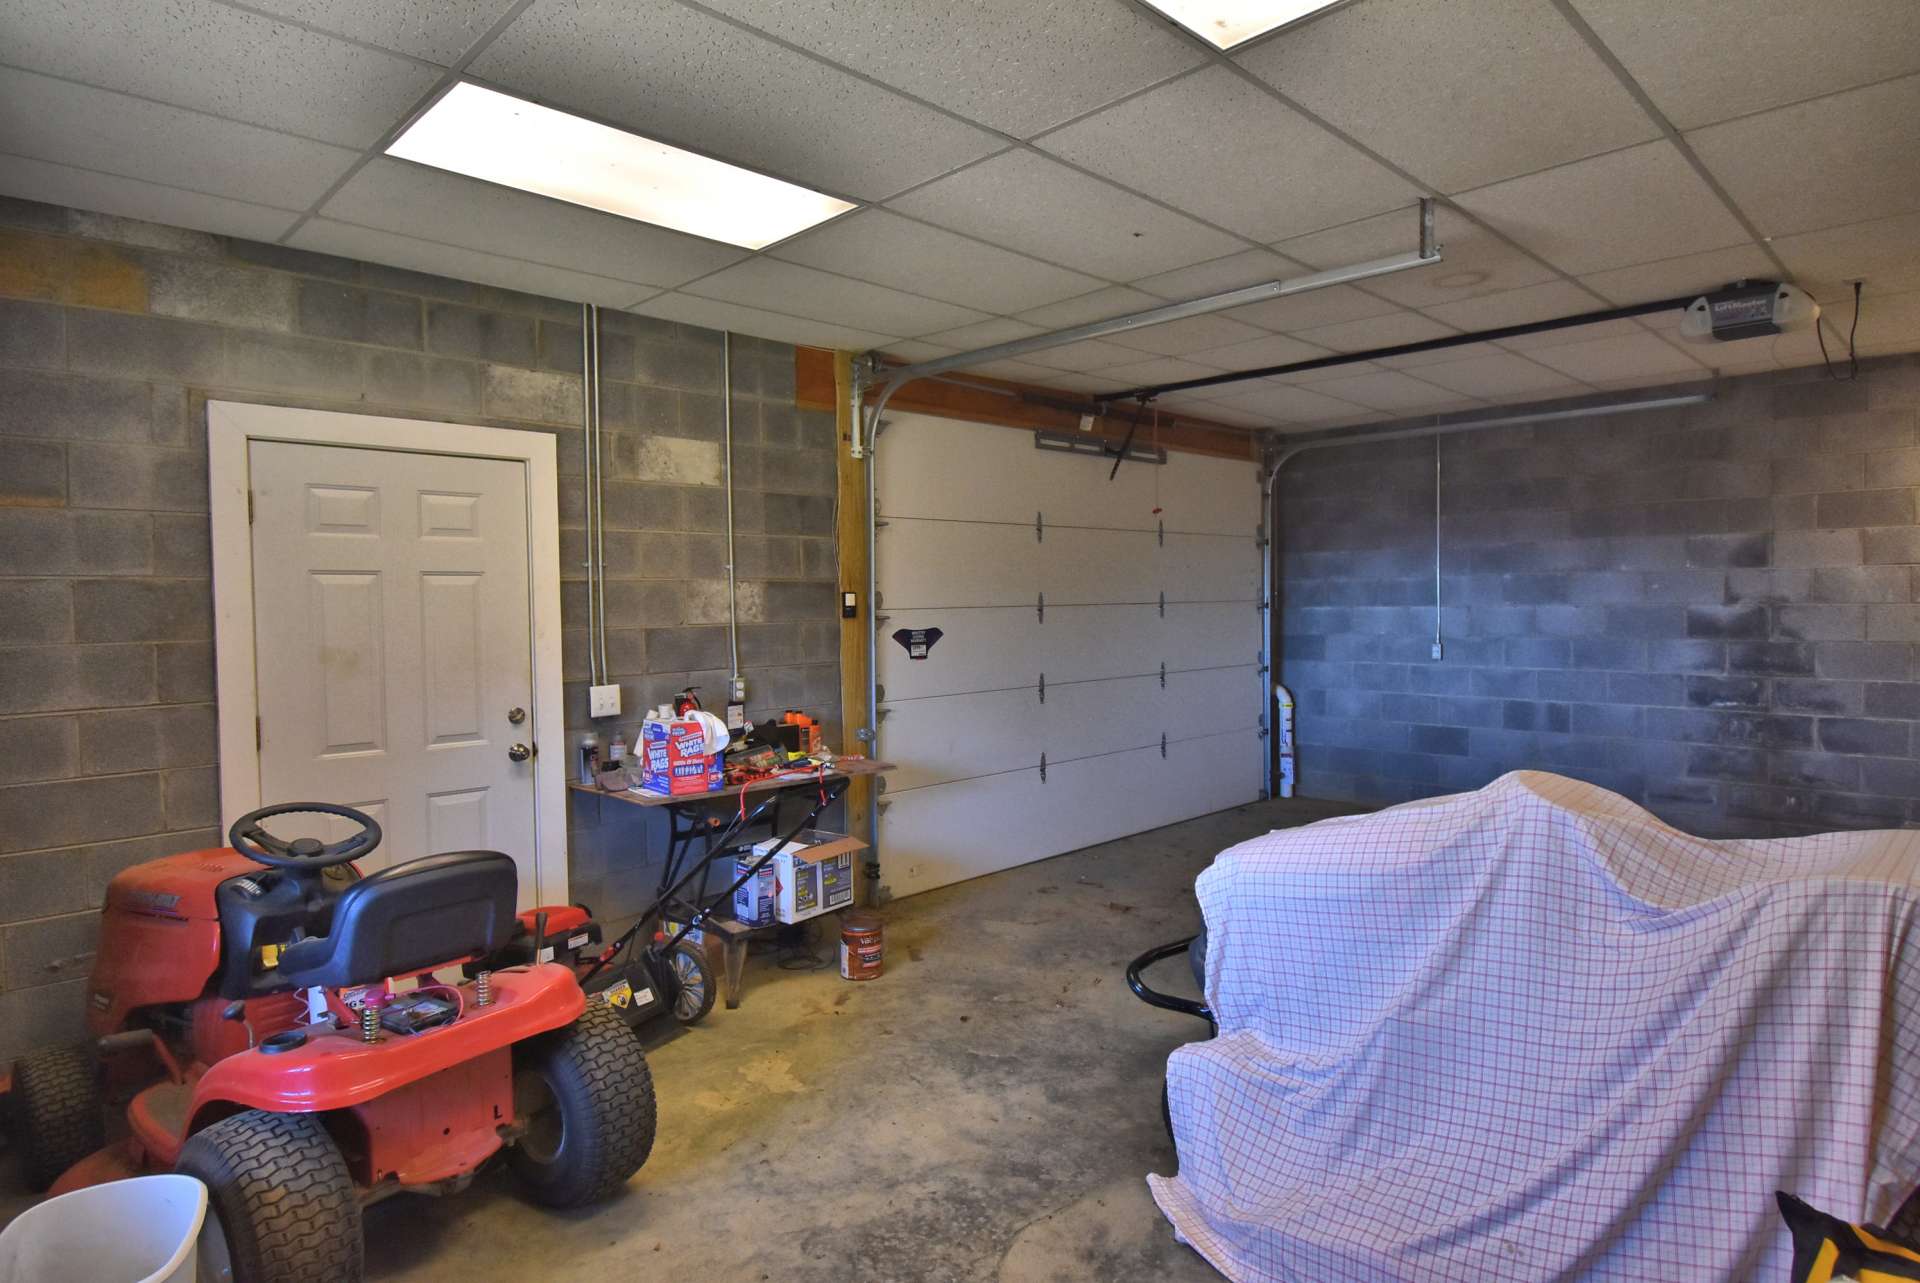 The full walkout lower level offers expansion potential on one side, and a workshop/garage area on the other side.  The garage/workshop area is plenty large enough for your vehicle and your lawn and garden equipment.